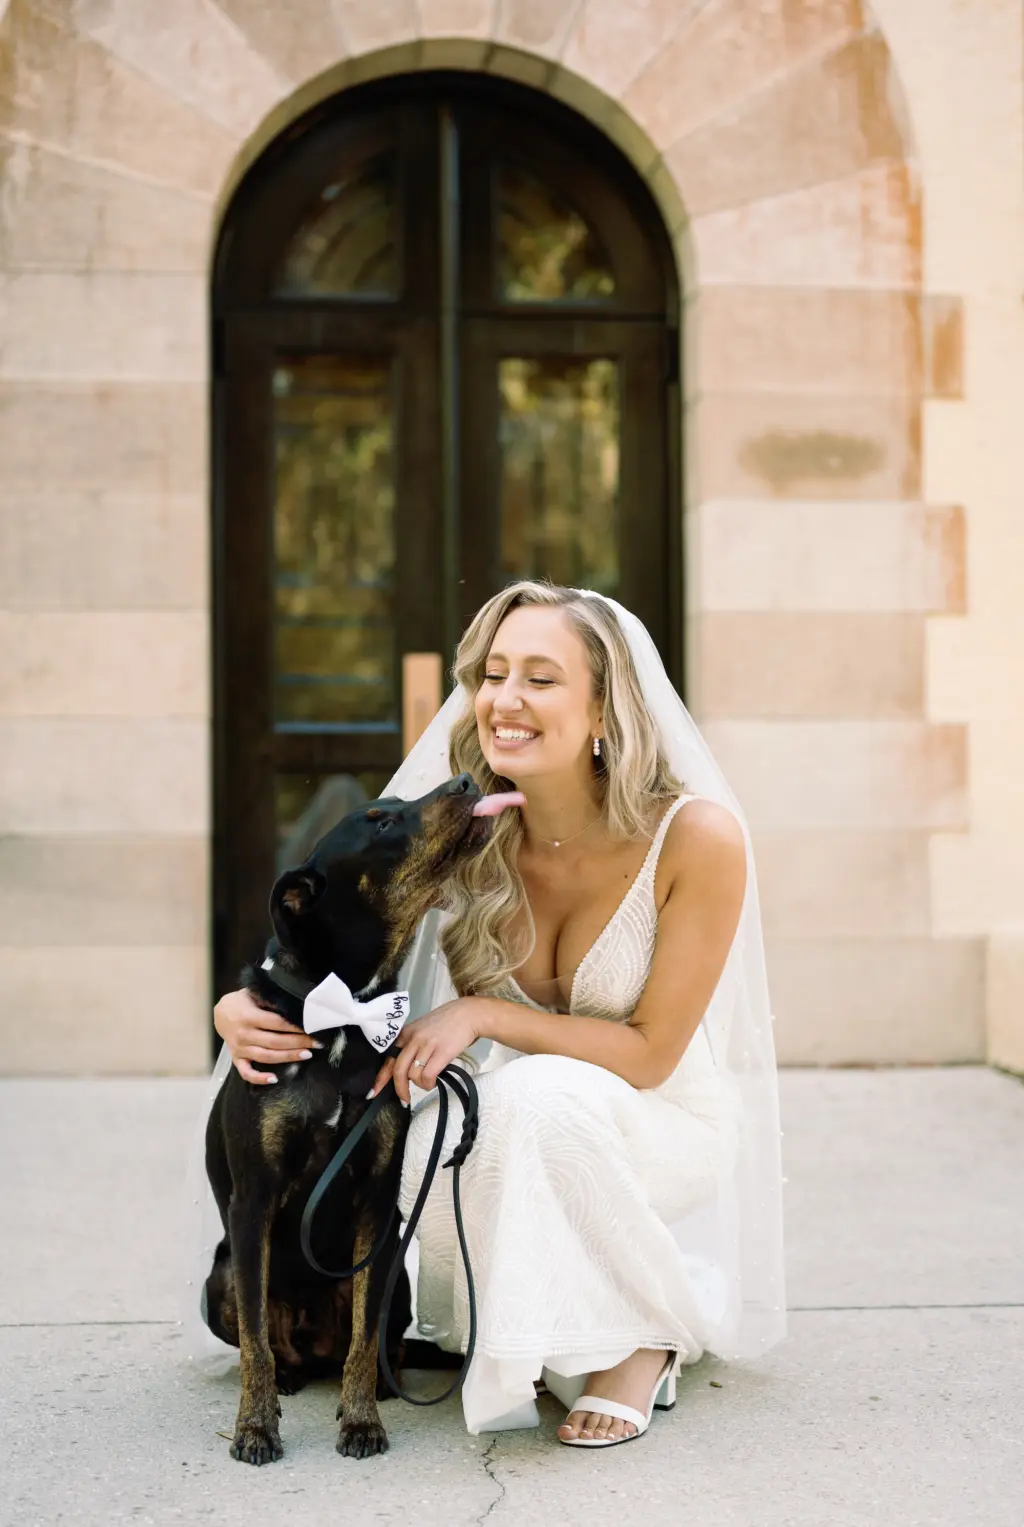 Bride with Dog Wedding Portrait | Best Boy Bowtie for Dogs in Weddings Inspiration | Sarasota Photographer Dewitt for Love Photography